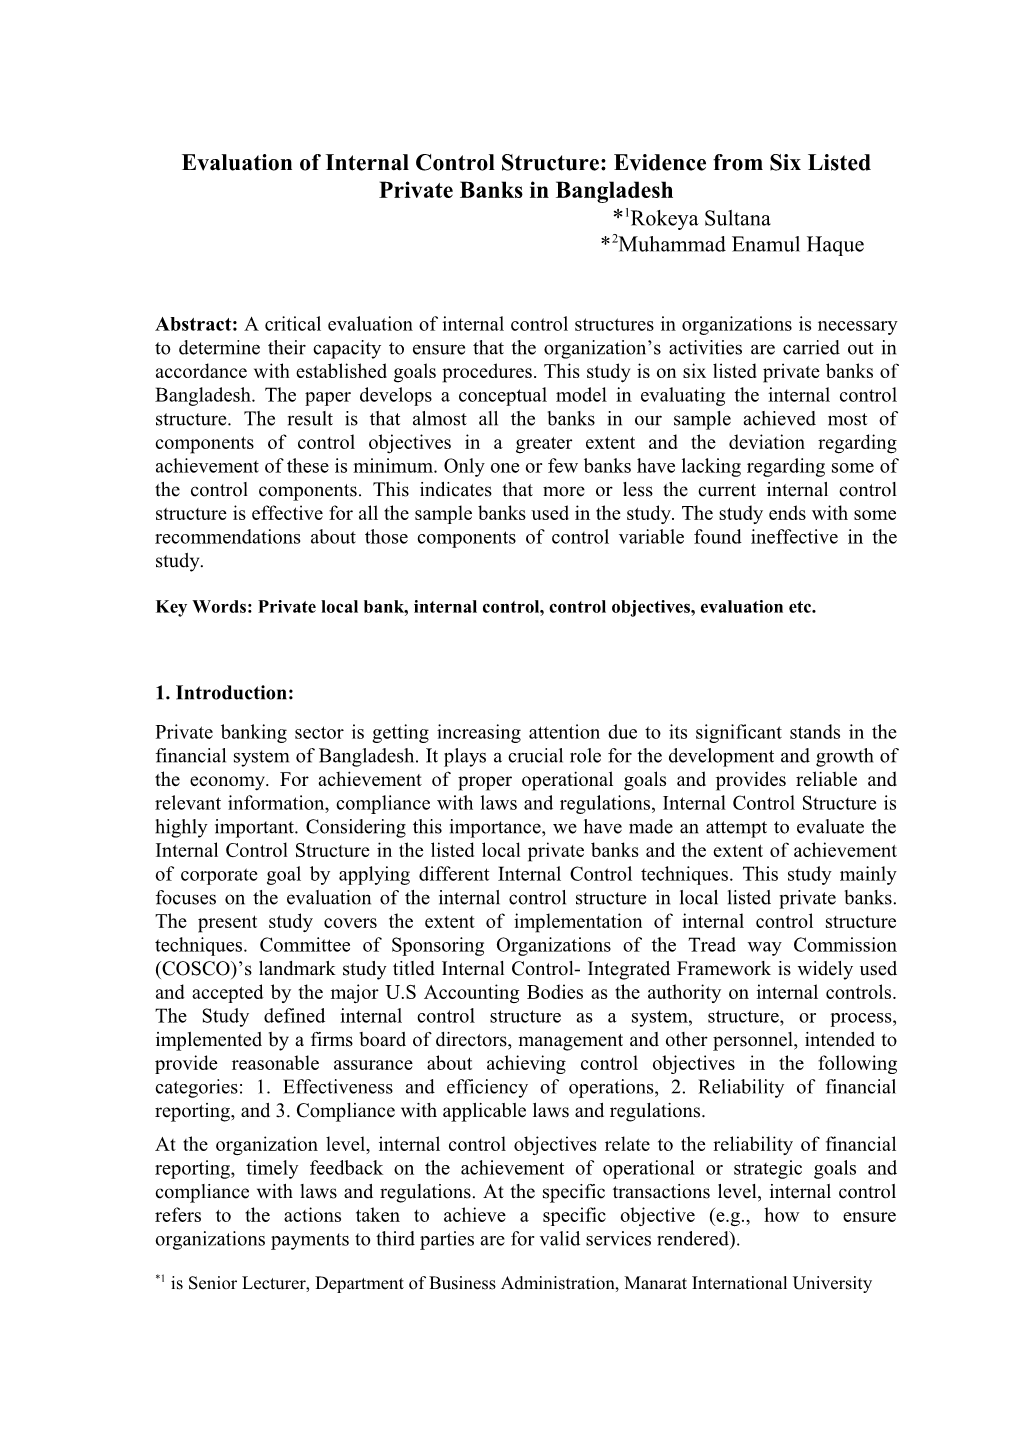 Evaluation of Internal Control Structure in Accounting Information System of the Listed